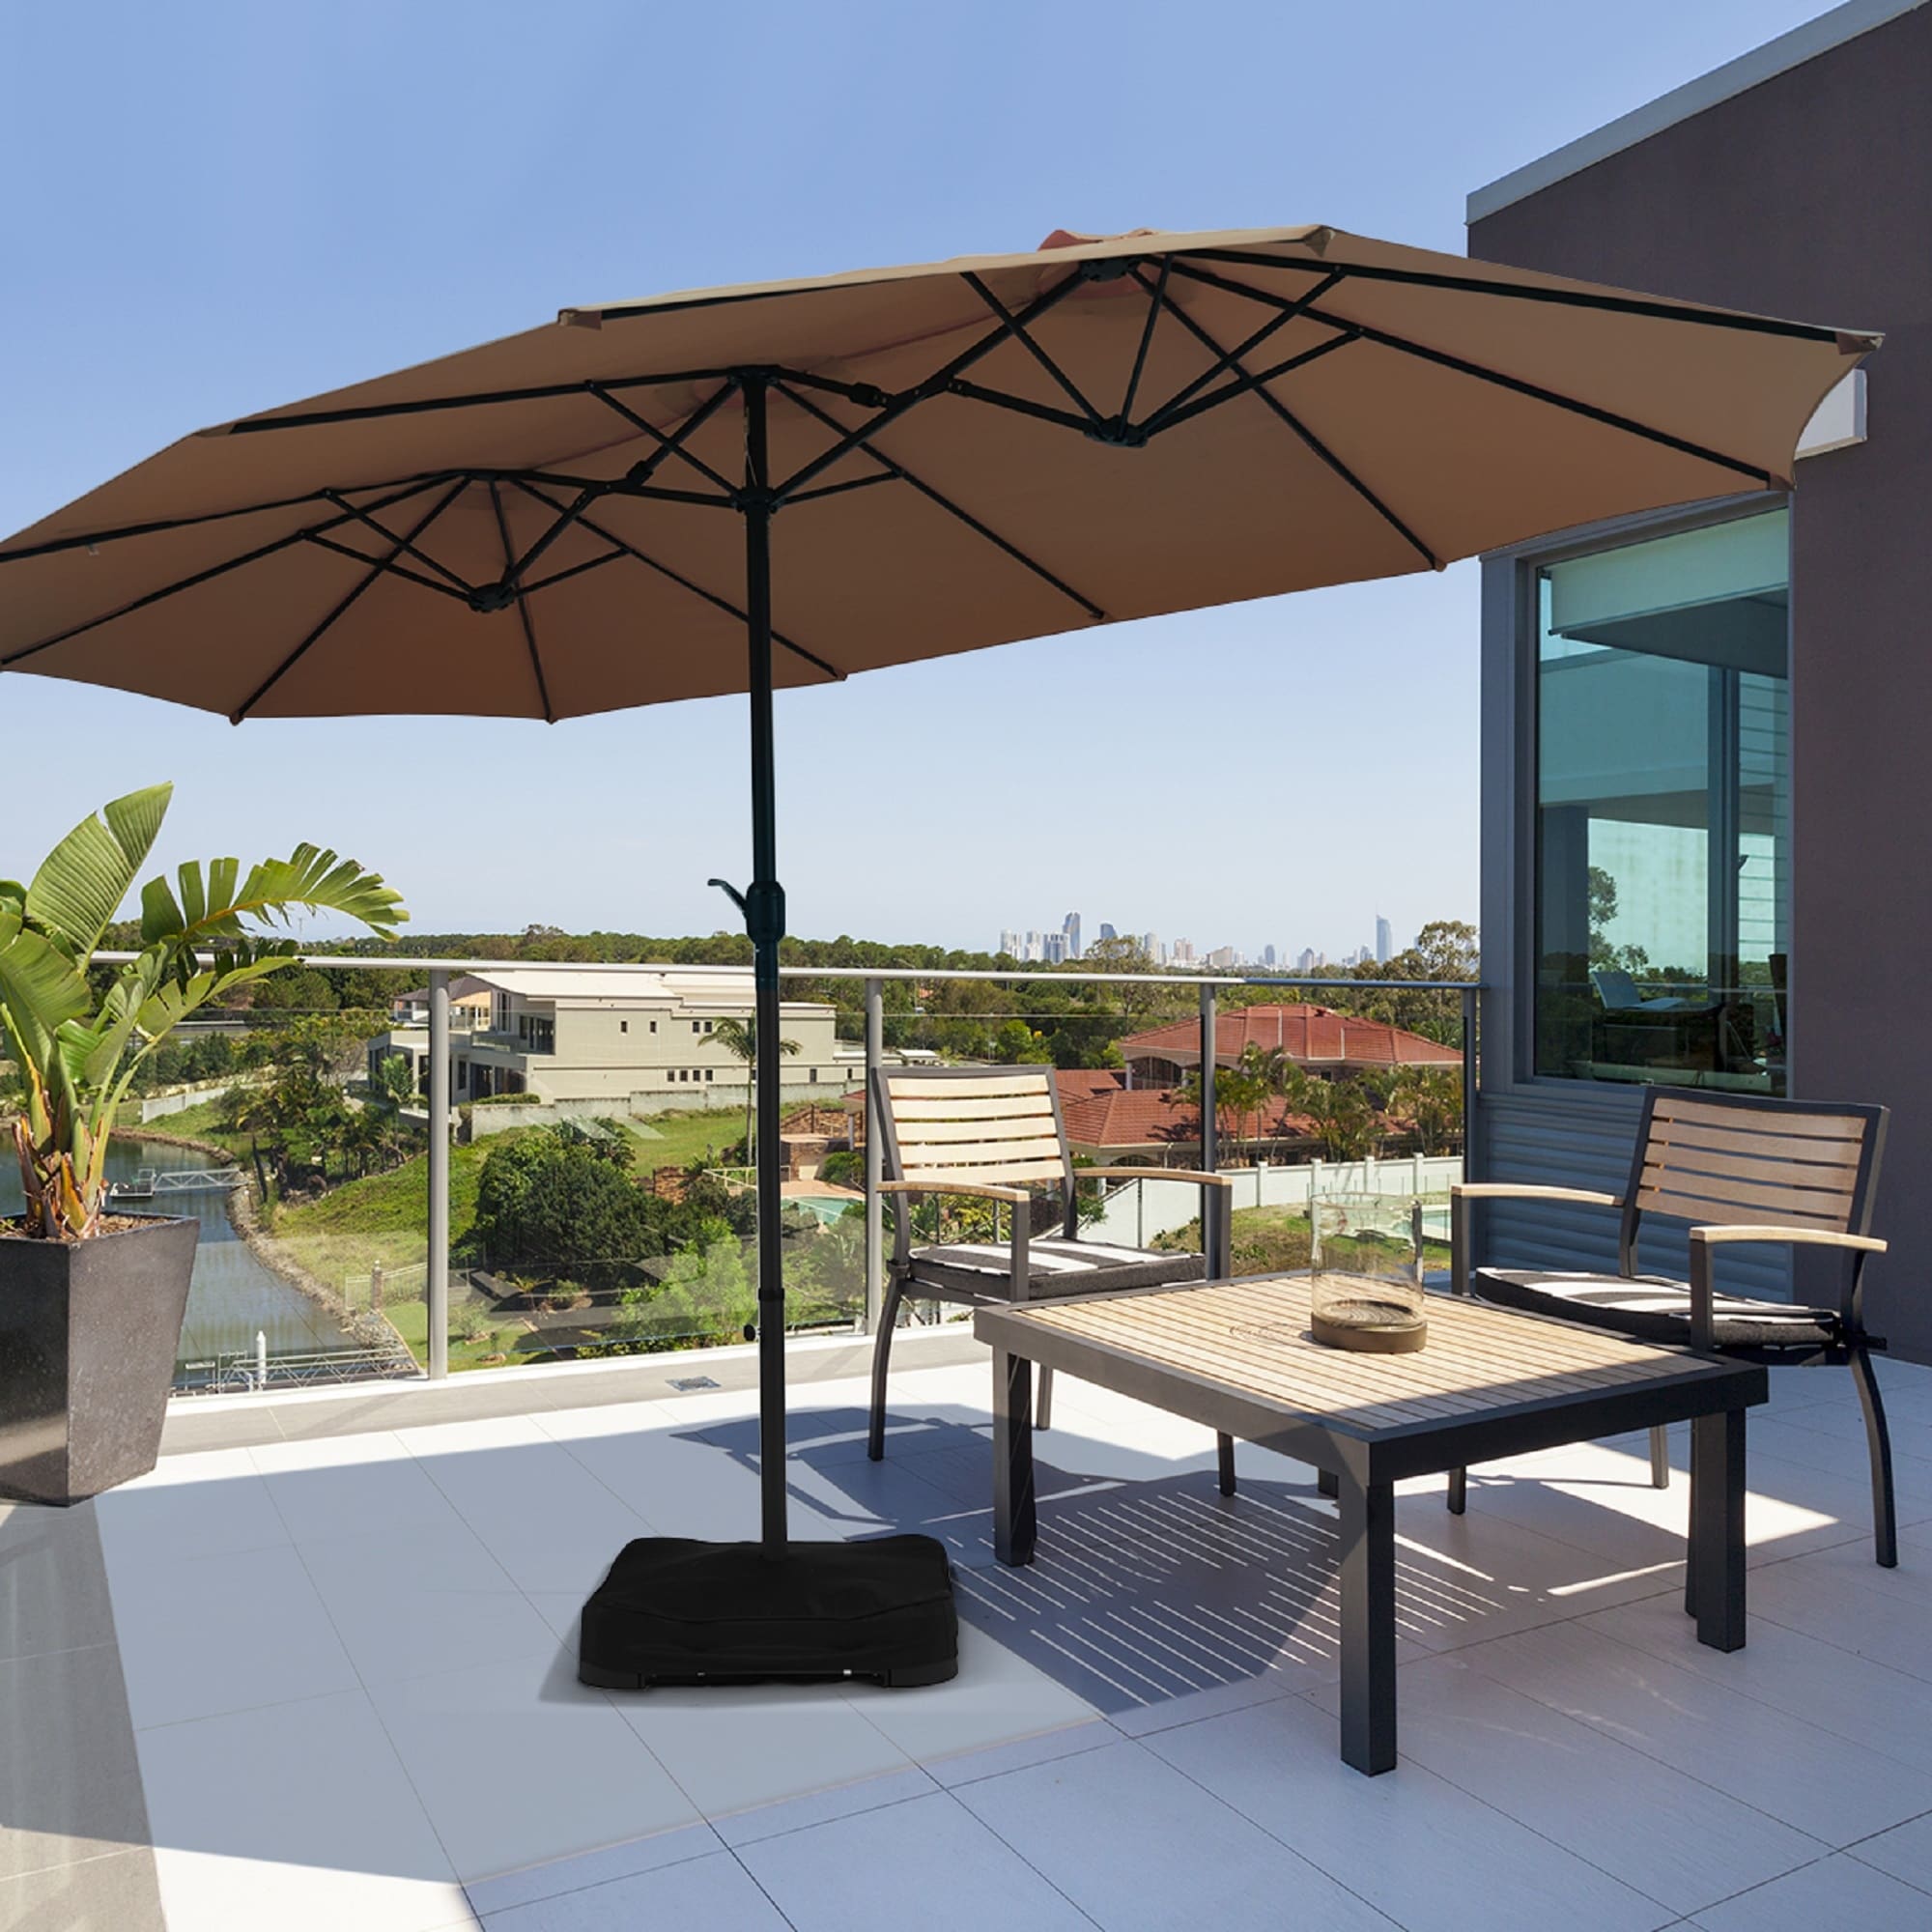 Details about   15 FT Double-Sided Patio Outdoor Umbrella Market Garden Yard Deck Pool Sunshade 